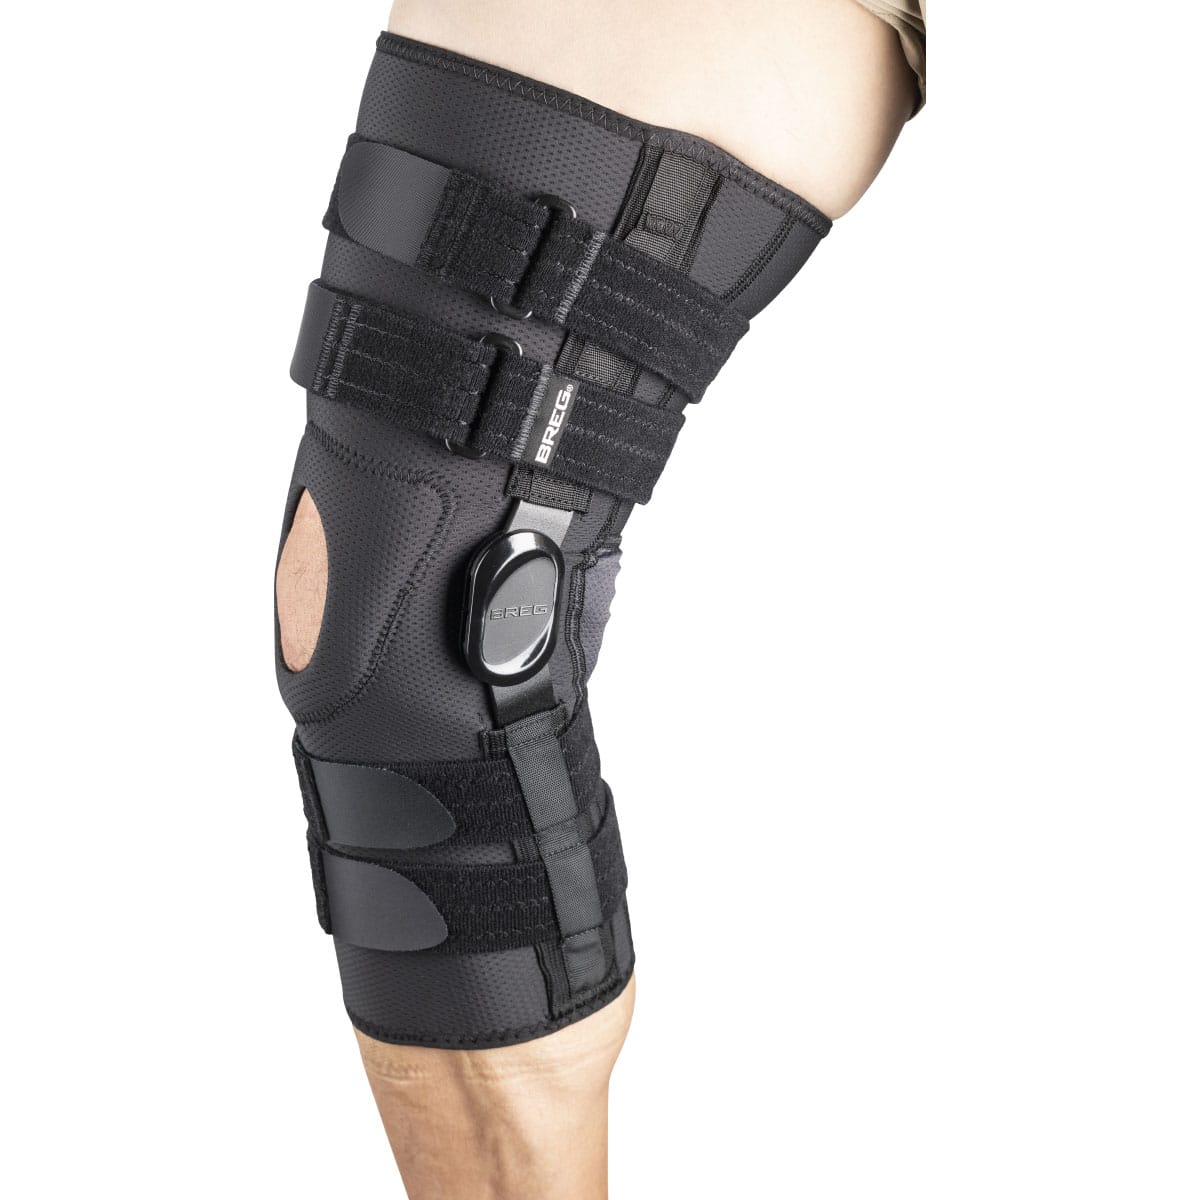 Knee Braces, Knee Supports, Knee Stabilizers